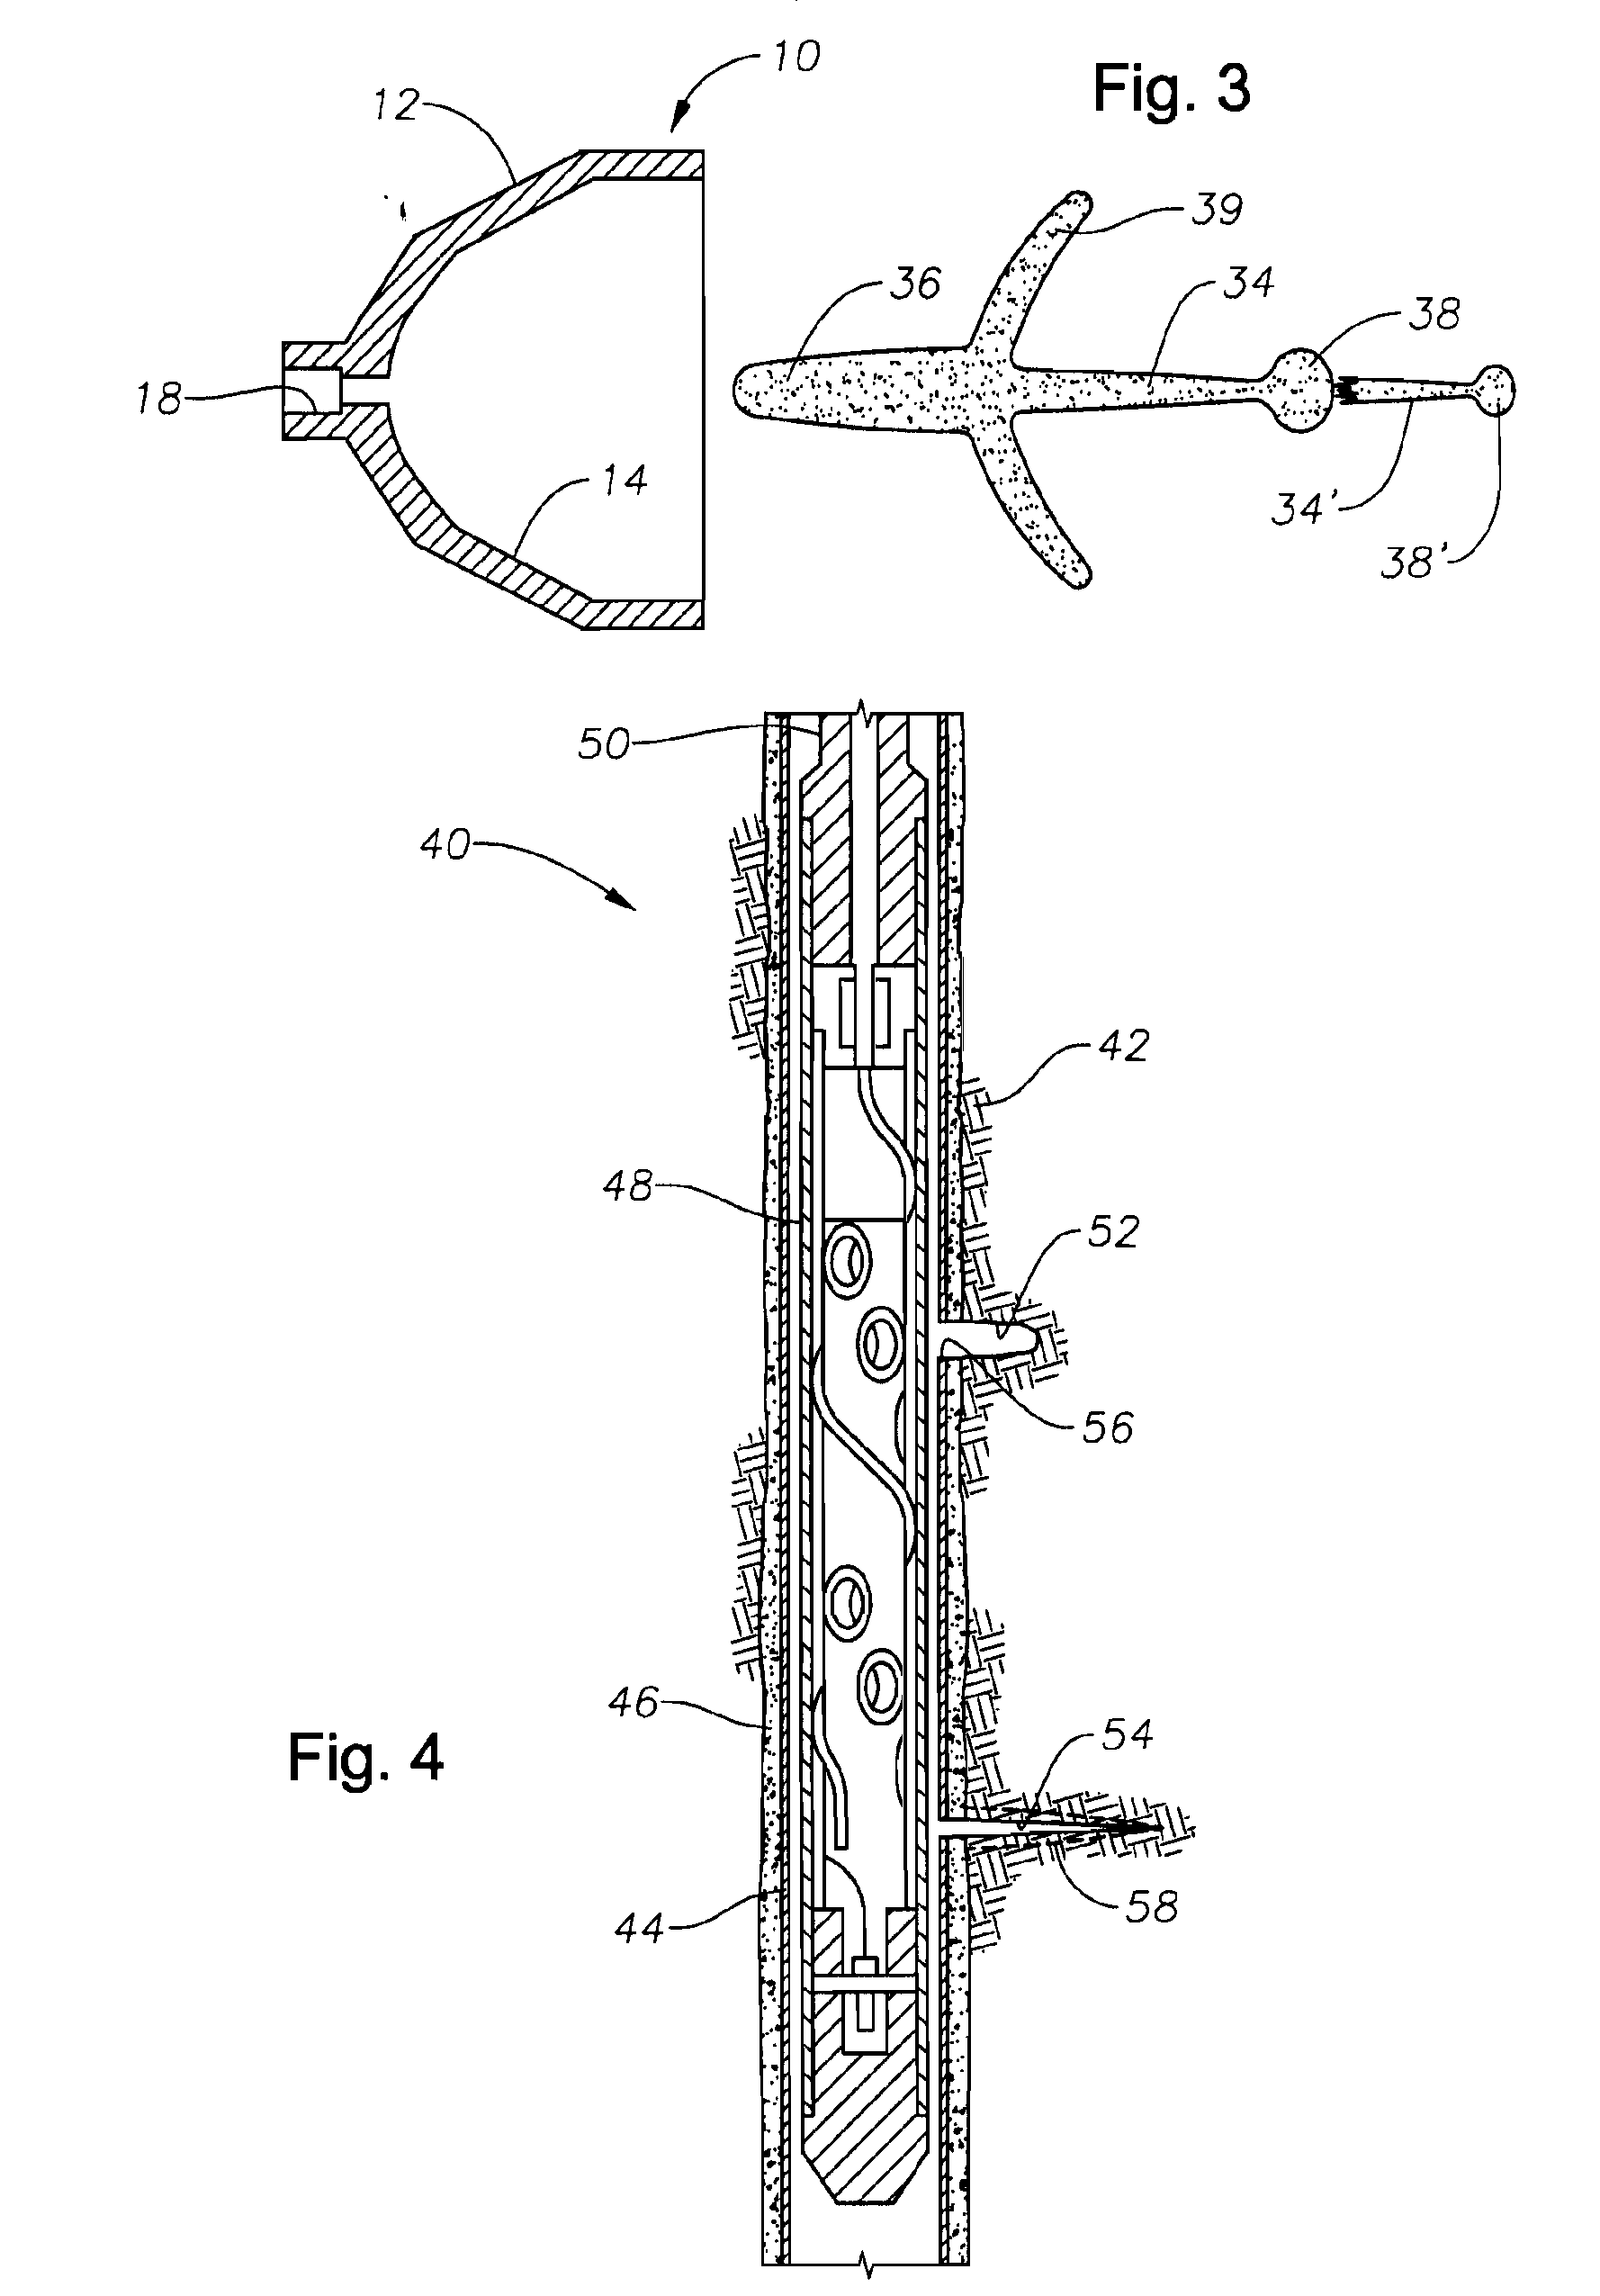 Apparatus and Method for Penetrating Oilbearing Sandy Formations, Reducing Skin Damage and Reducing Hydrocarbon Viscosity